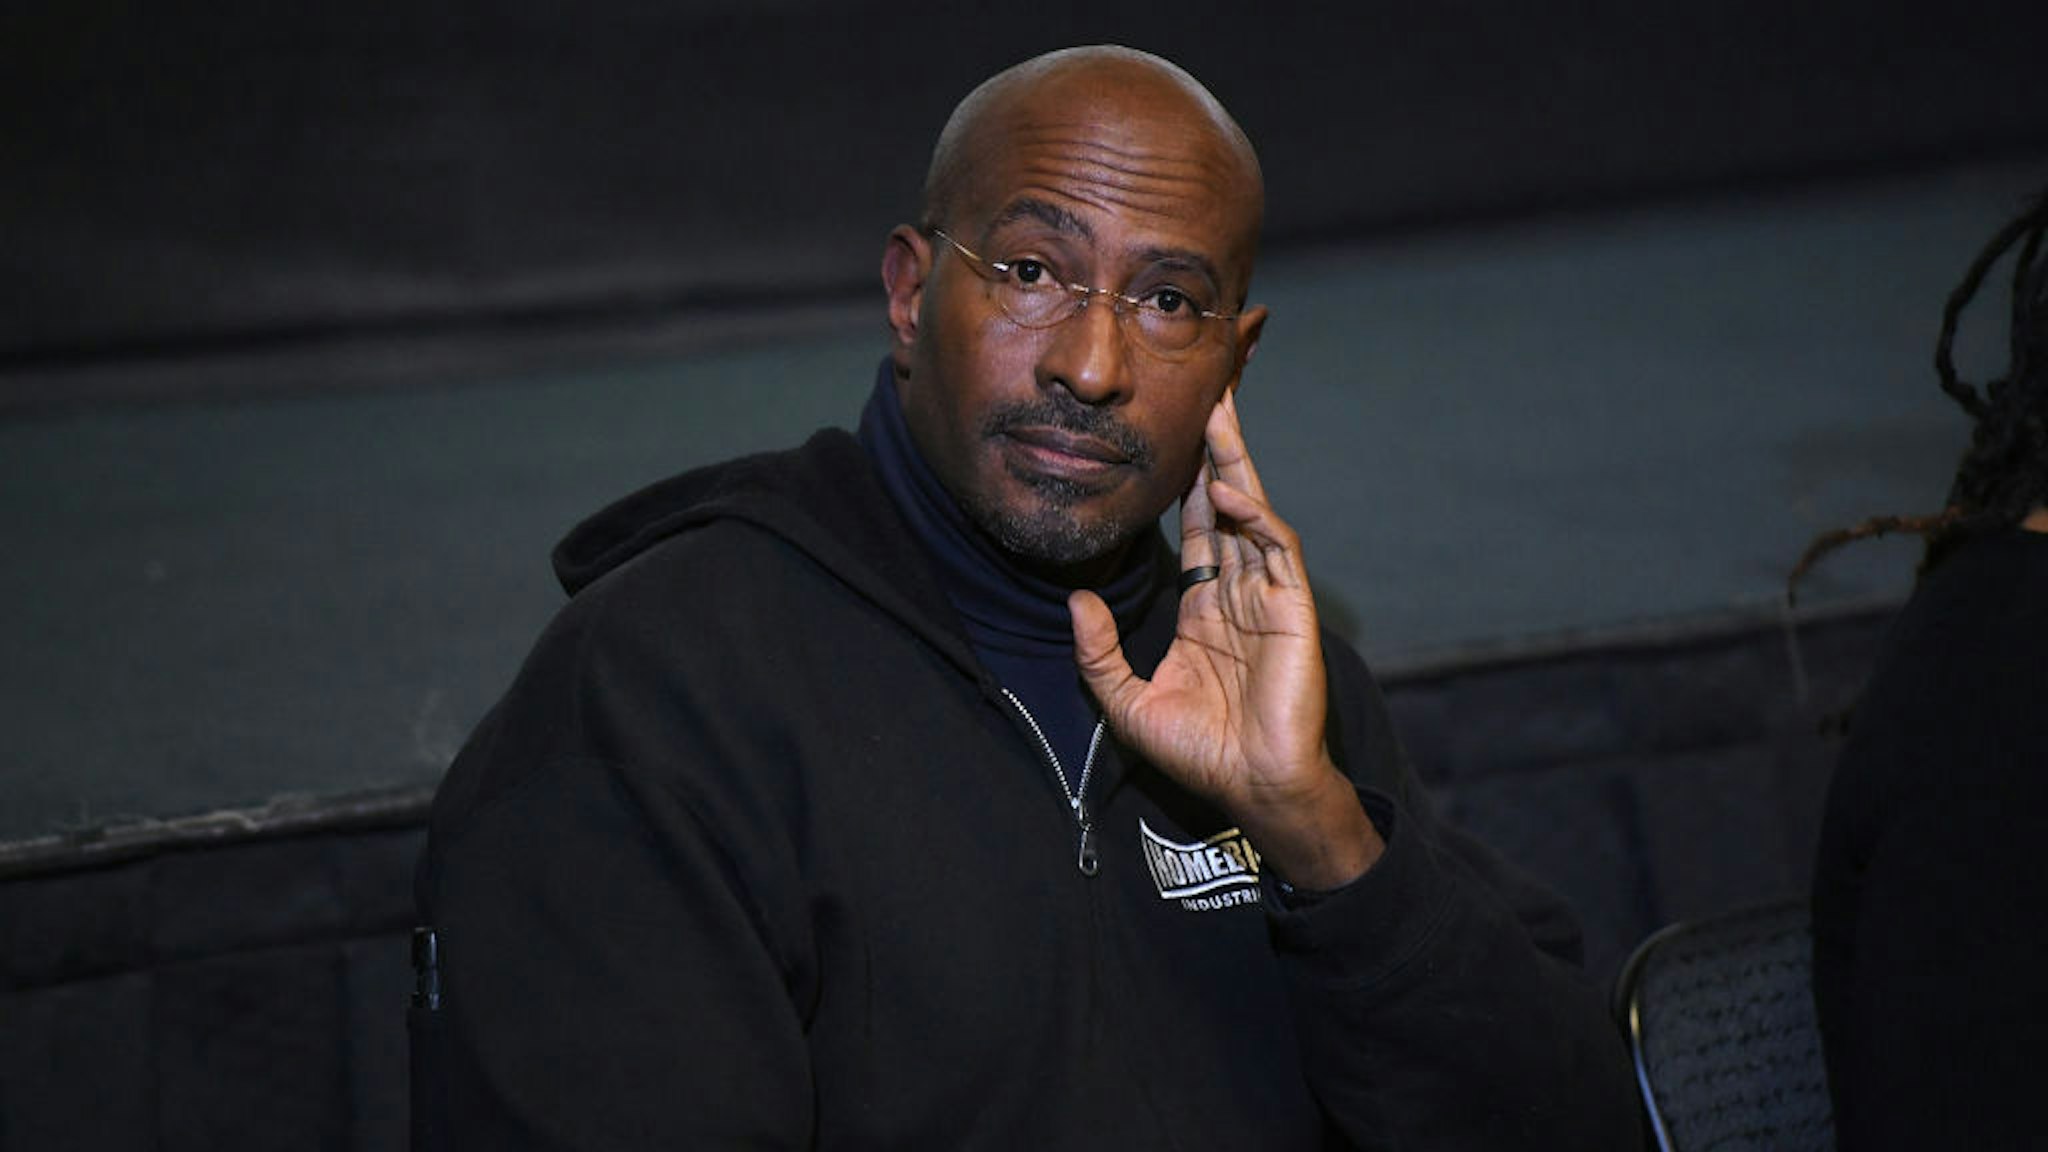 LOS ANGELES, CALIFORNIA - FEBRUARY 25: Van Jones addresses the audience at a panel discussion of "The First Step" at Laemmle Royal on February 25, 2023 in Los Angeles, California. (Photo by Michael Tullberg/Getty Images)